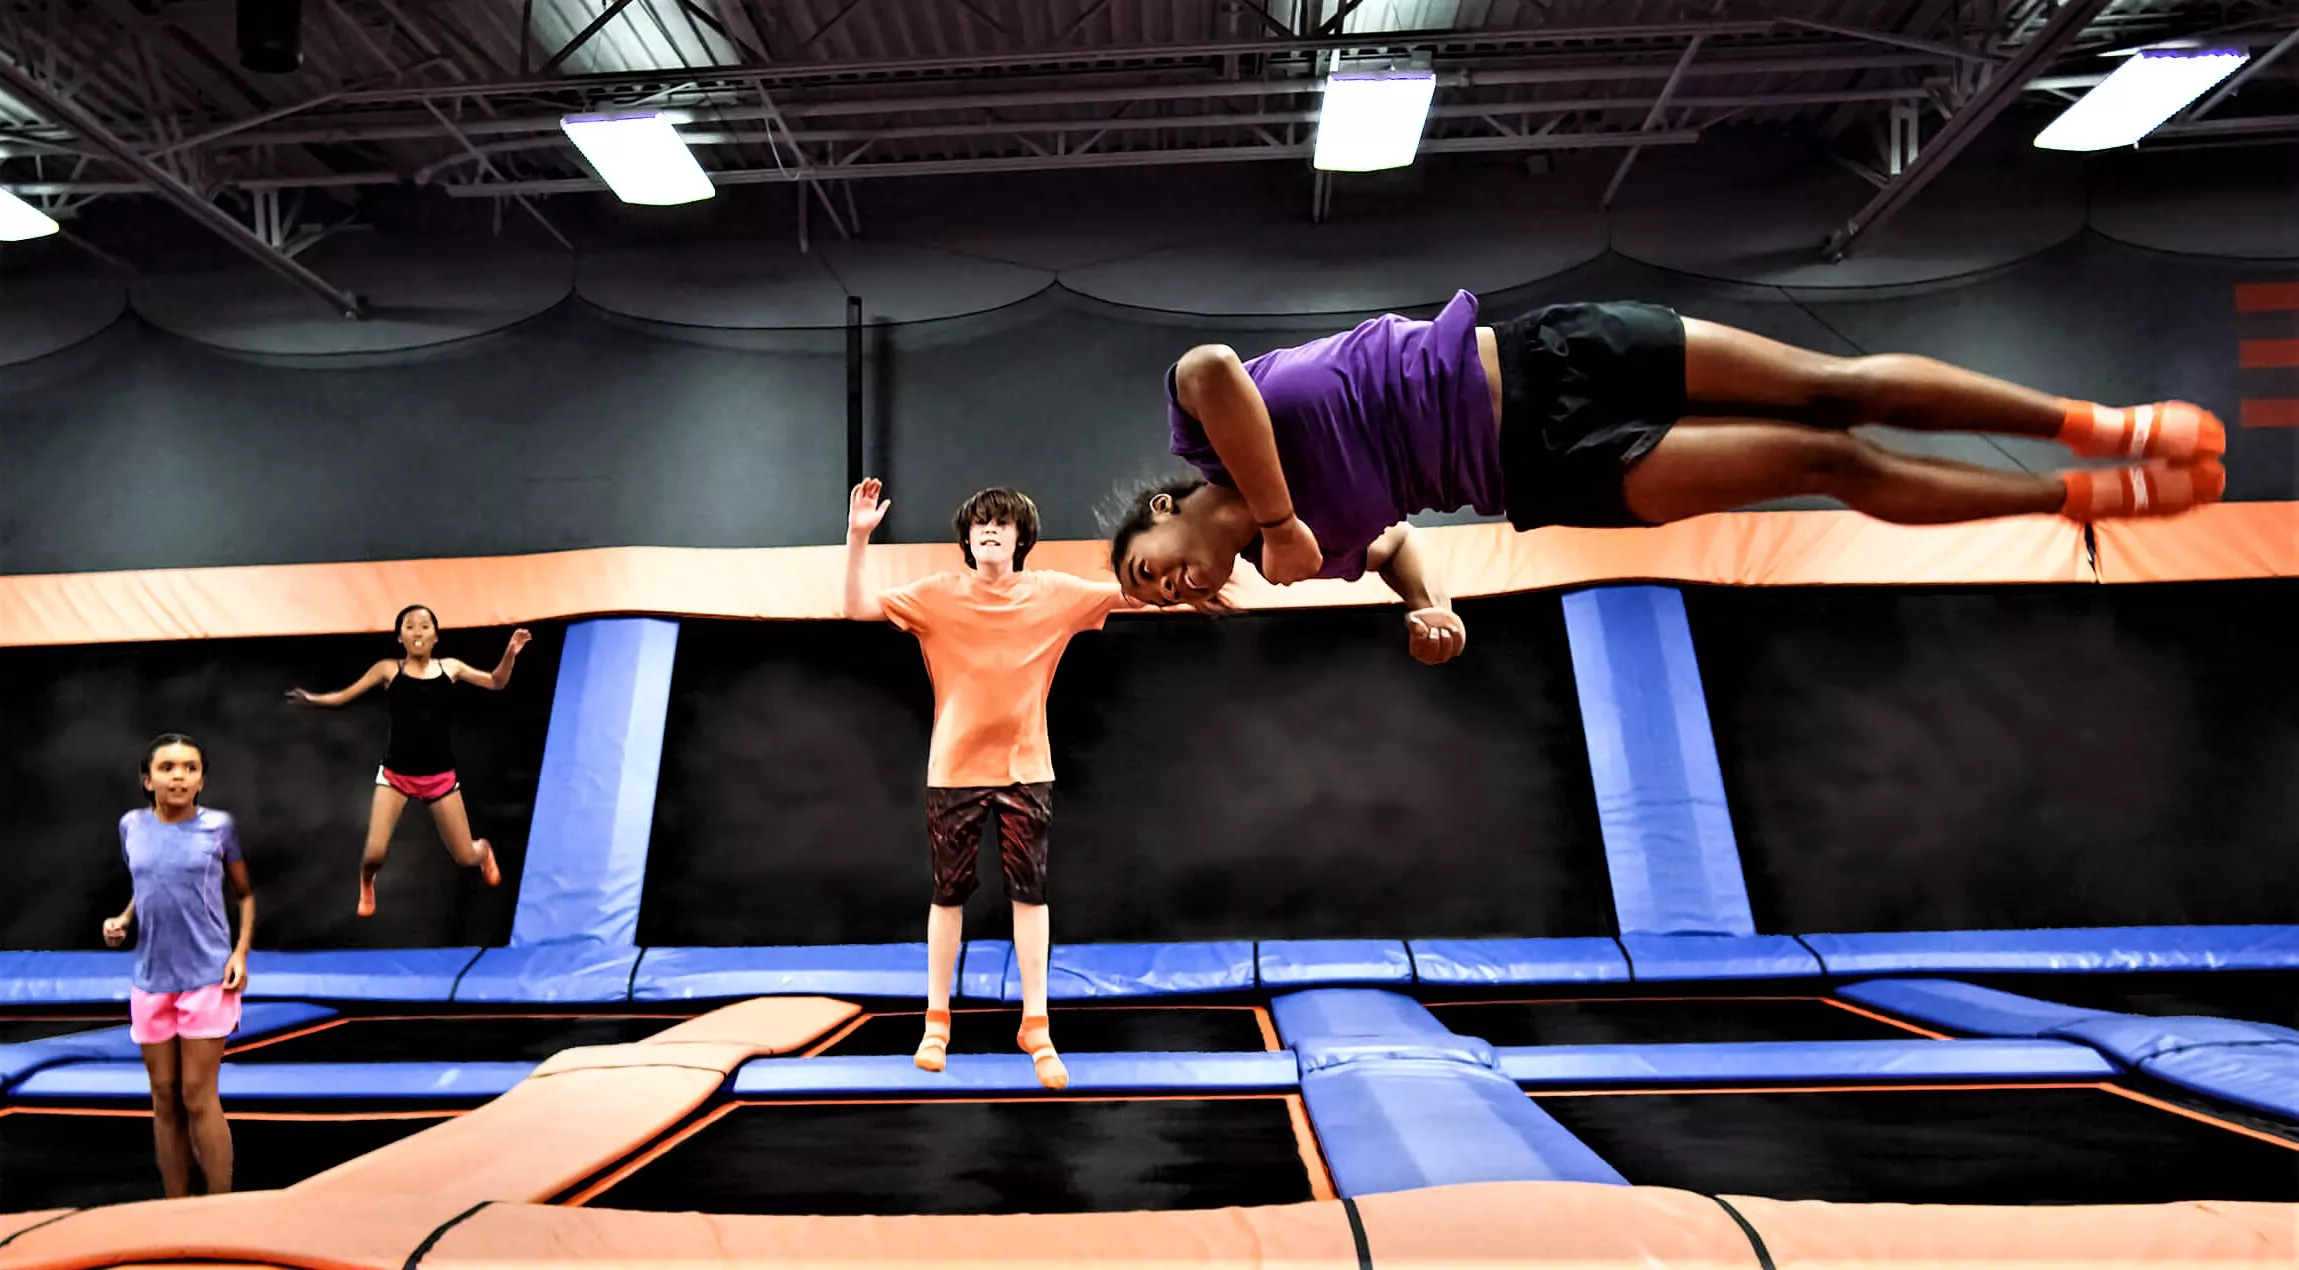 Sky Zone Trampoline Park in Canada, North America | Trampolining - Rated 4.8